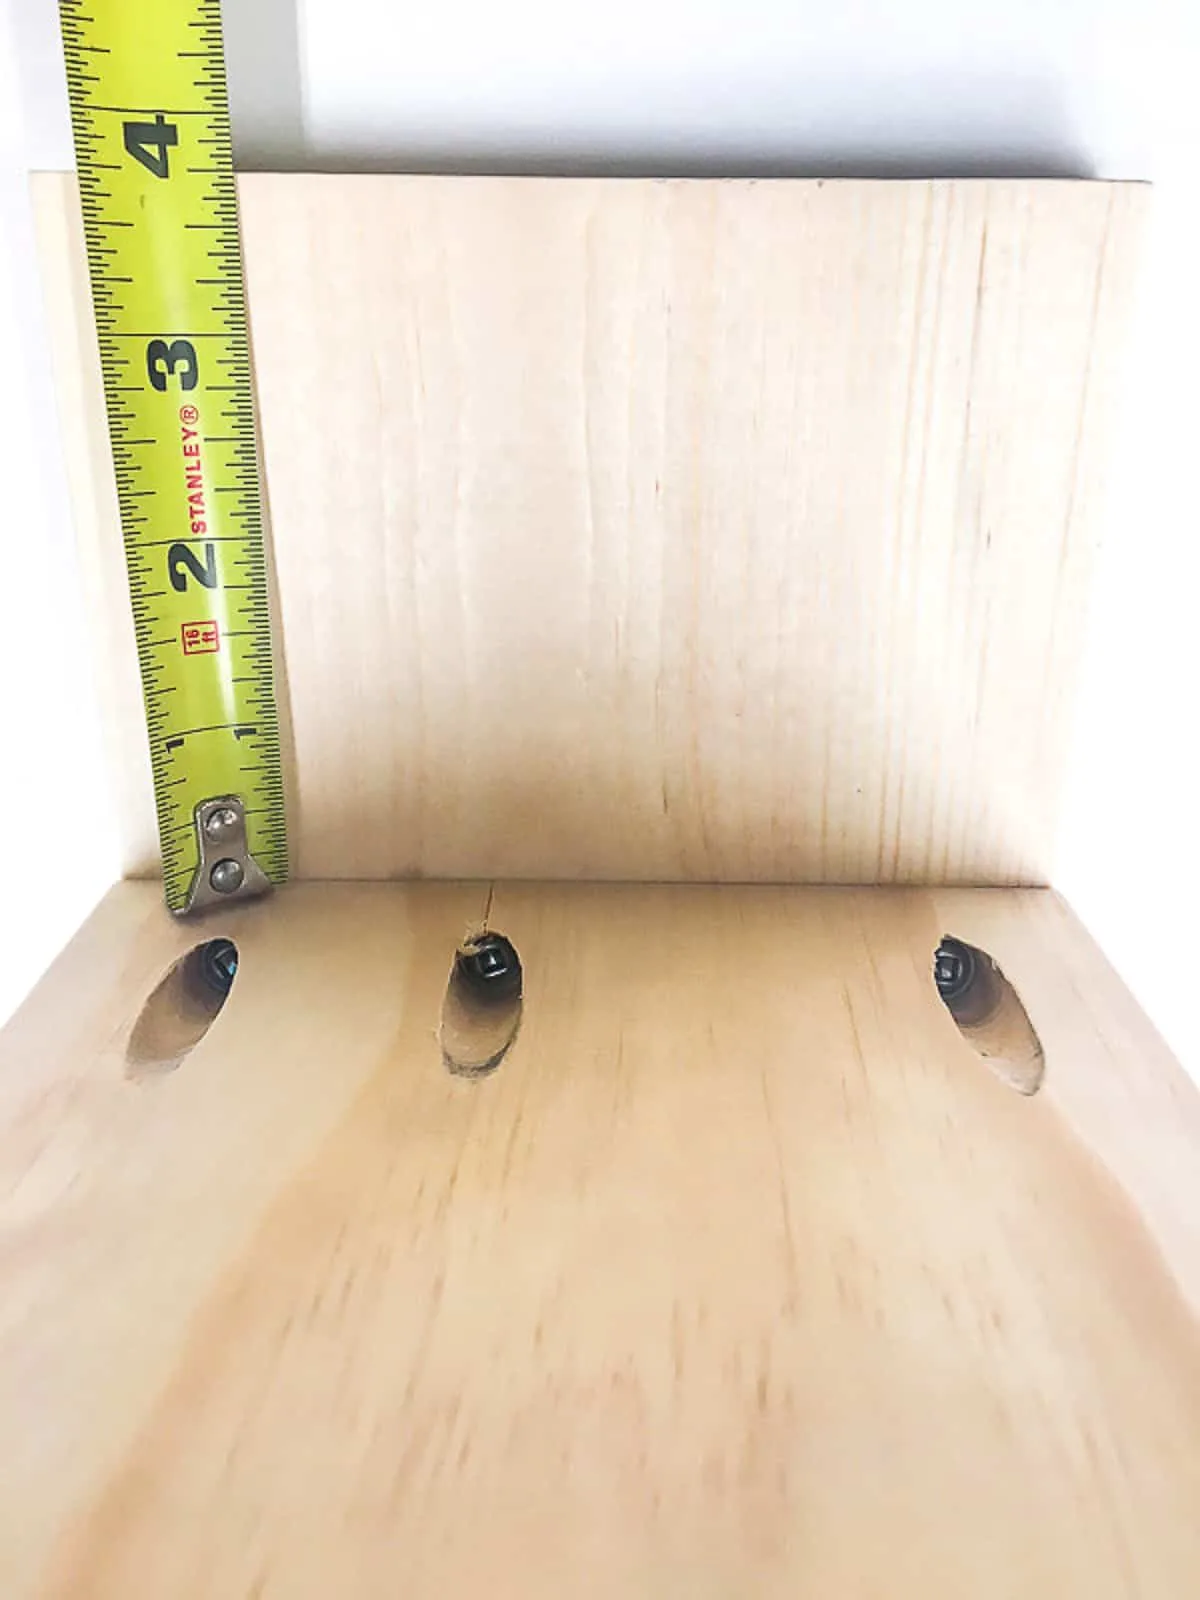 checking the height of the second desk shelf with a tape measure